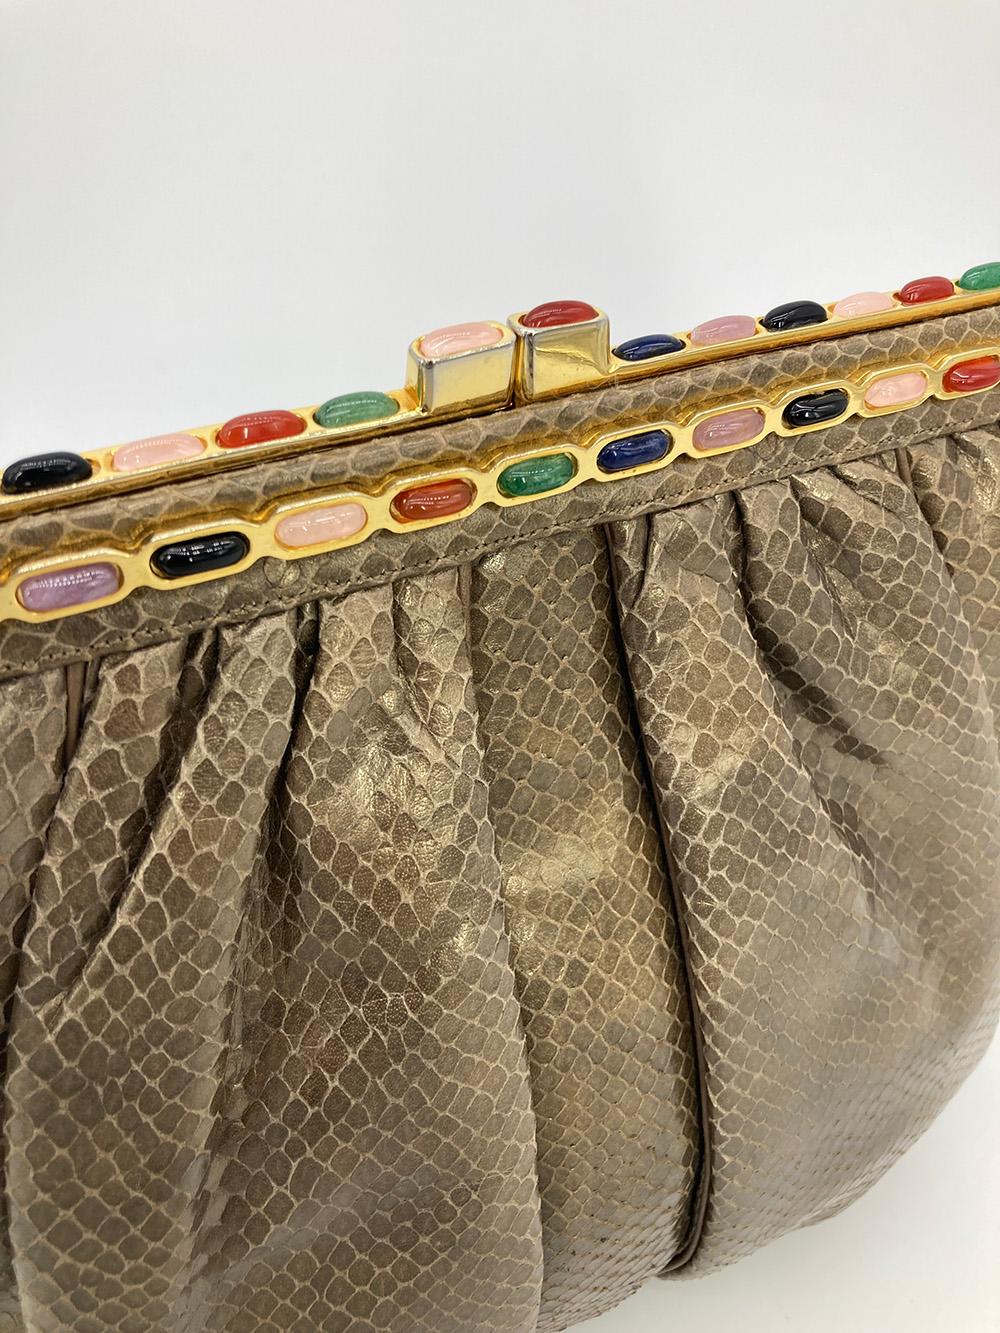 Vintage Judith Leiber Bronze Snakeskin Clutch in very good condition. Bronze pleated snakeskin exterior trimmed with gold hardware and multi color gemstones along top edges. Top kiss lock closure opens to a tan nylon interior with one zip and one